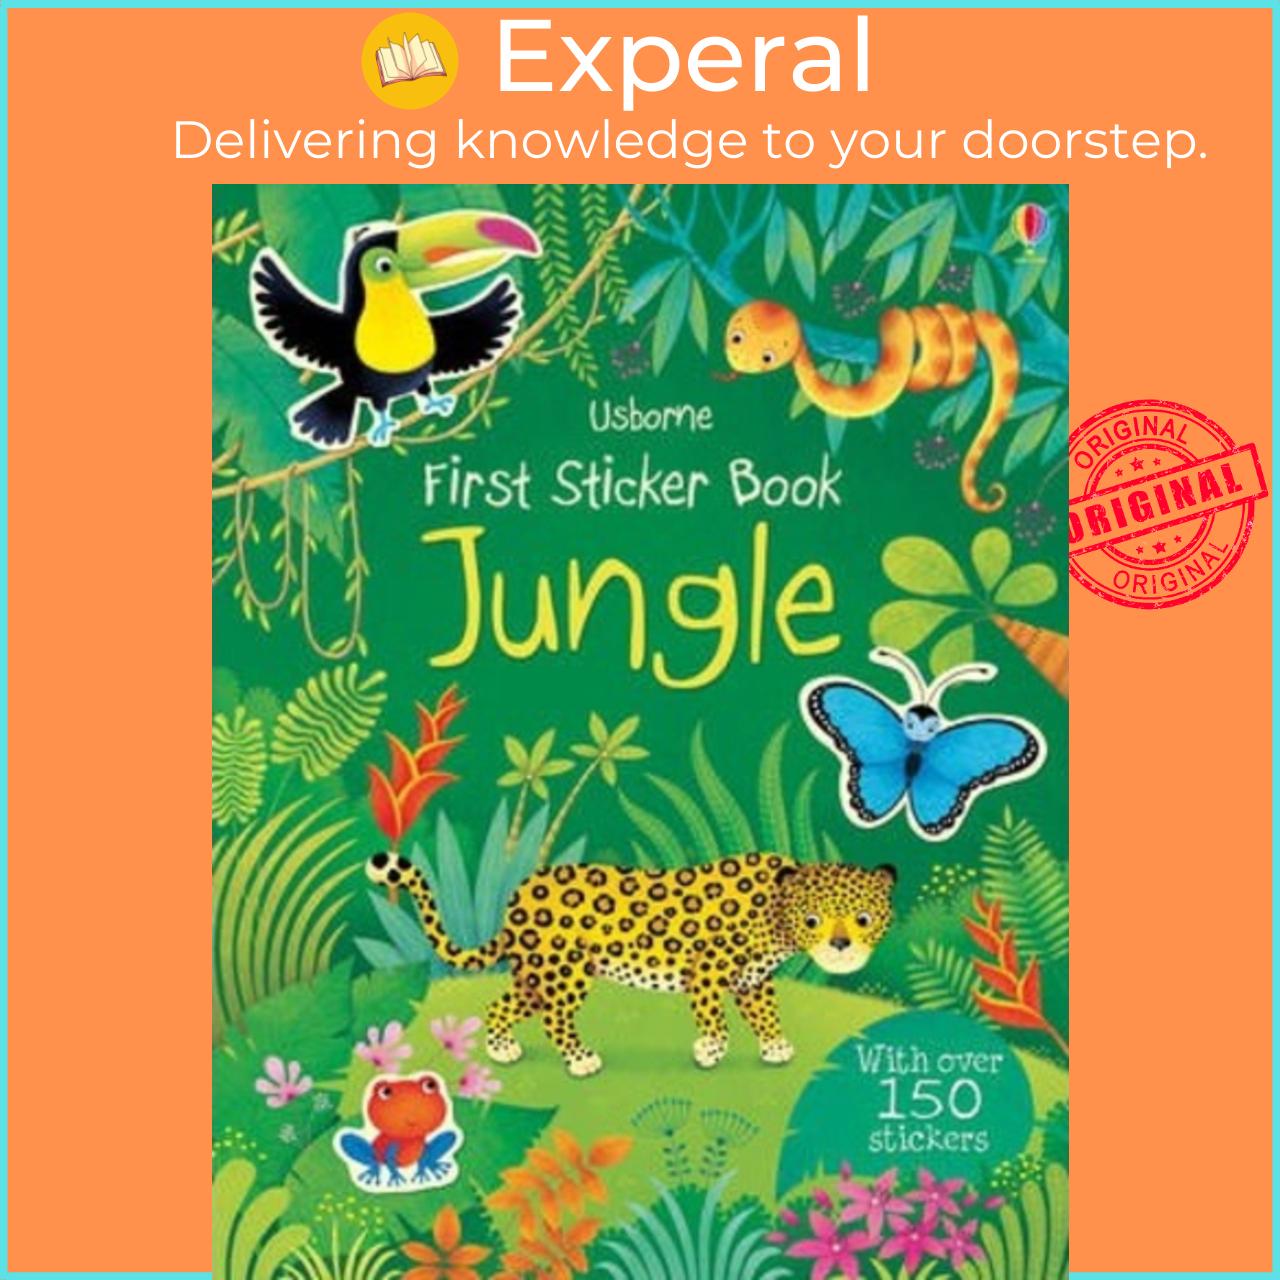 Sách - First Sticker Book Jungle by Alice Primmer (UK edition, paperback)